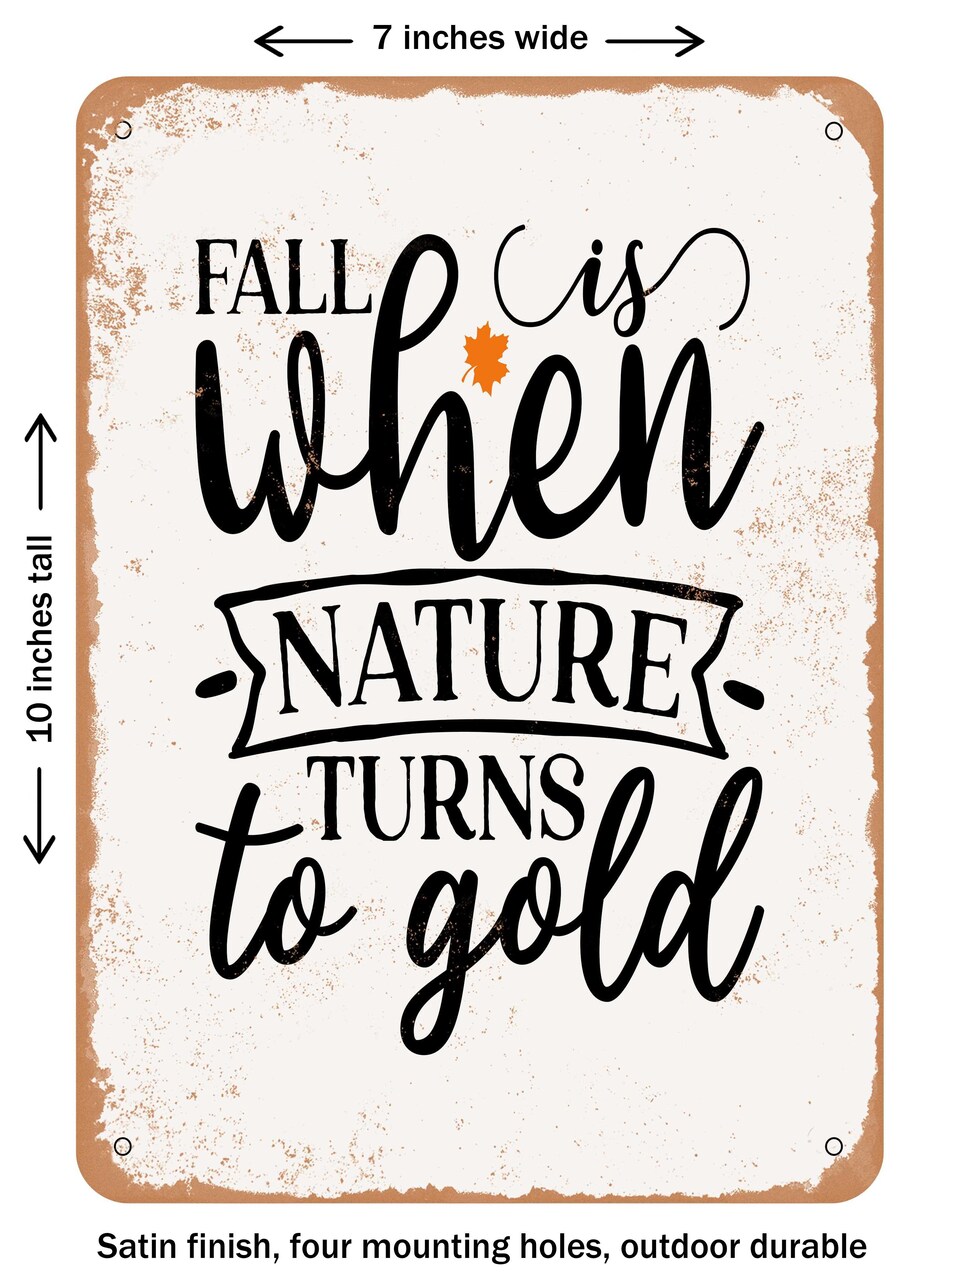 DECORATIVE METAL SIGN - Fall is When Nature Turns to Gold - 2  - Vintage Rusty Look